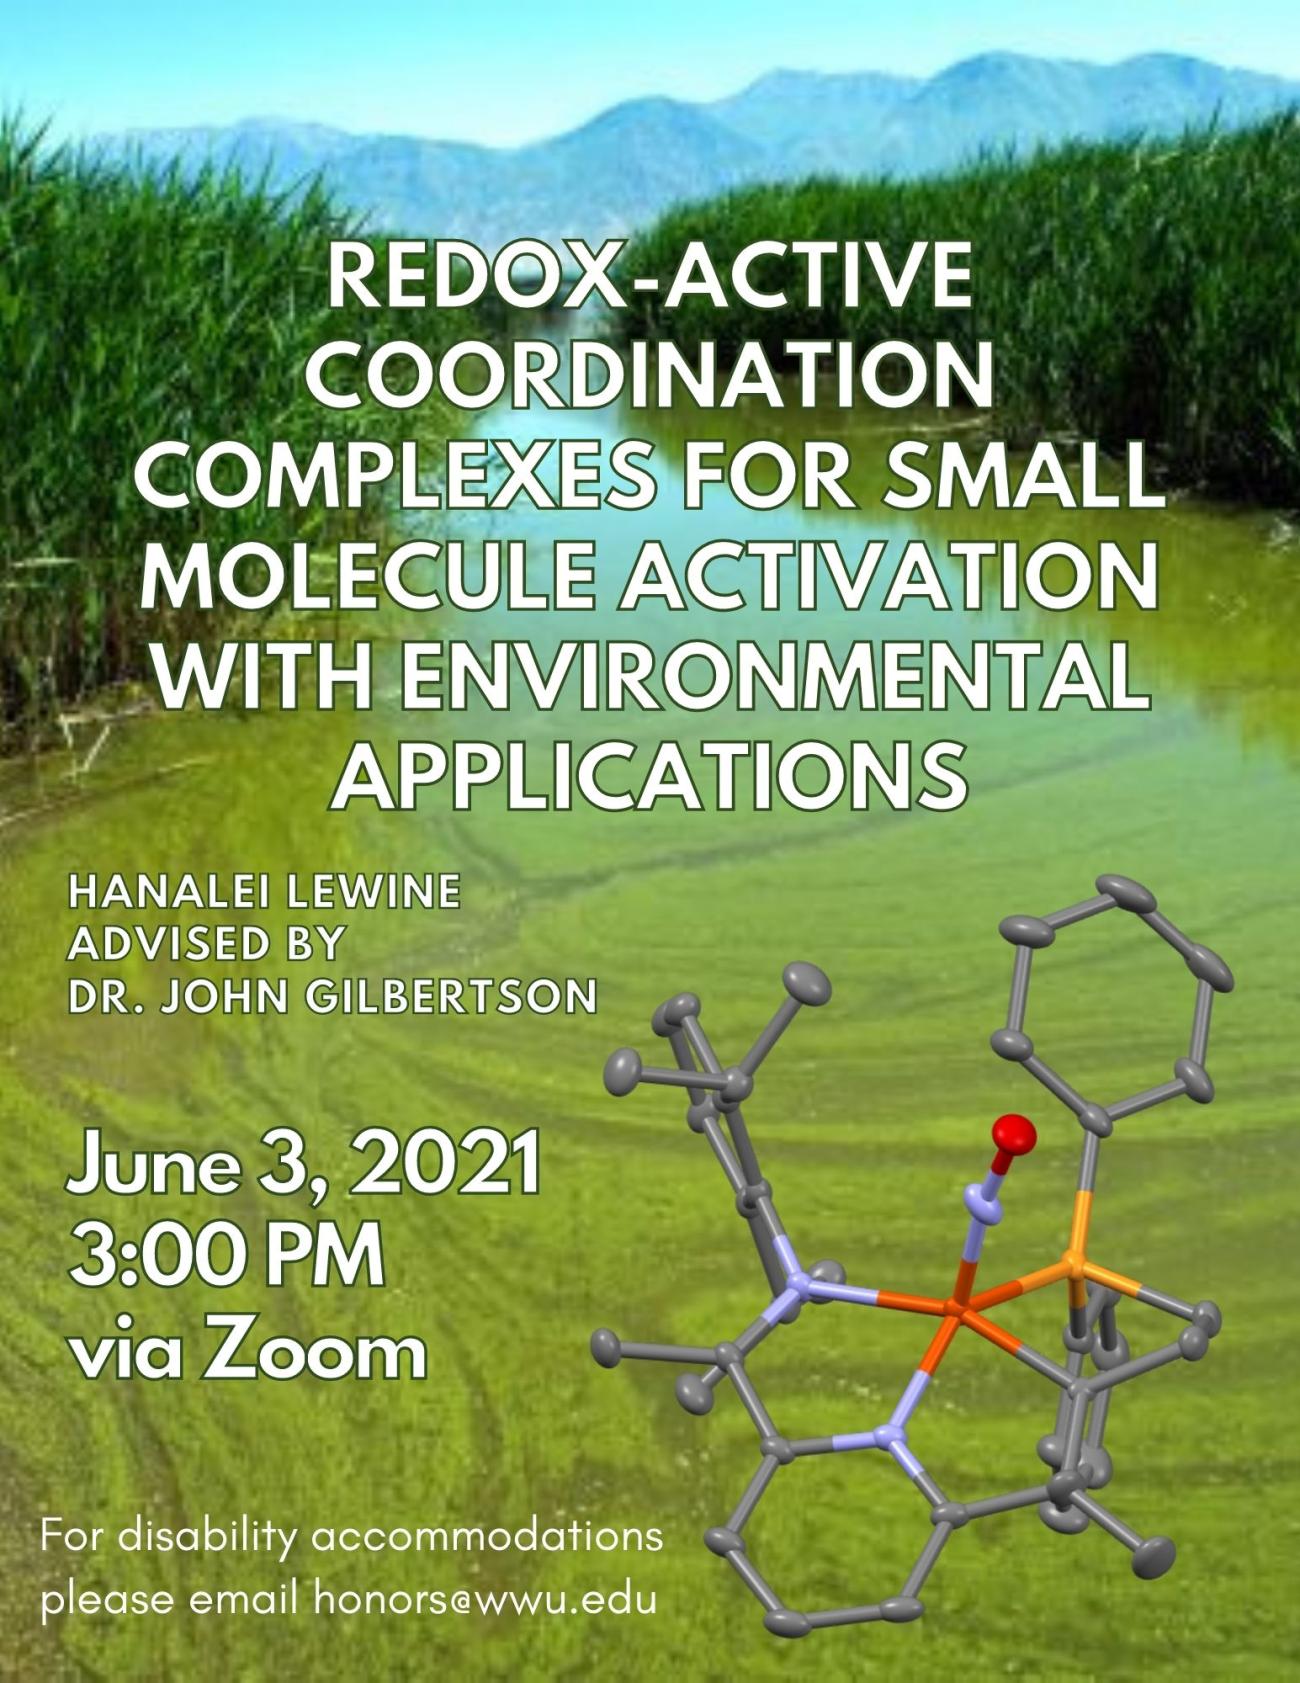 Picture of green waterway with algae surrounded by grass with mountains in the background. Chemical structure in bottom right corner. White text reads: “Redox-Active Coordination Complexes for Small Molecule Activation with Environmental Applications. Hanalei Lewine. Advised by Dr. John Gilbertson. June 3, 2021. 3:00 PM. Via Zoom. For disability accommodations please email honors@wwu.edu.”